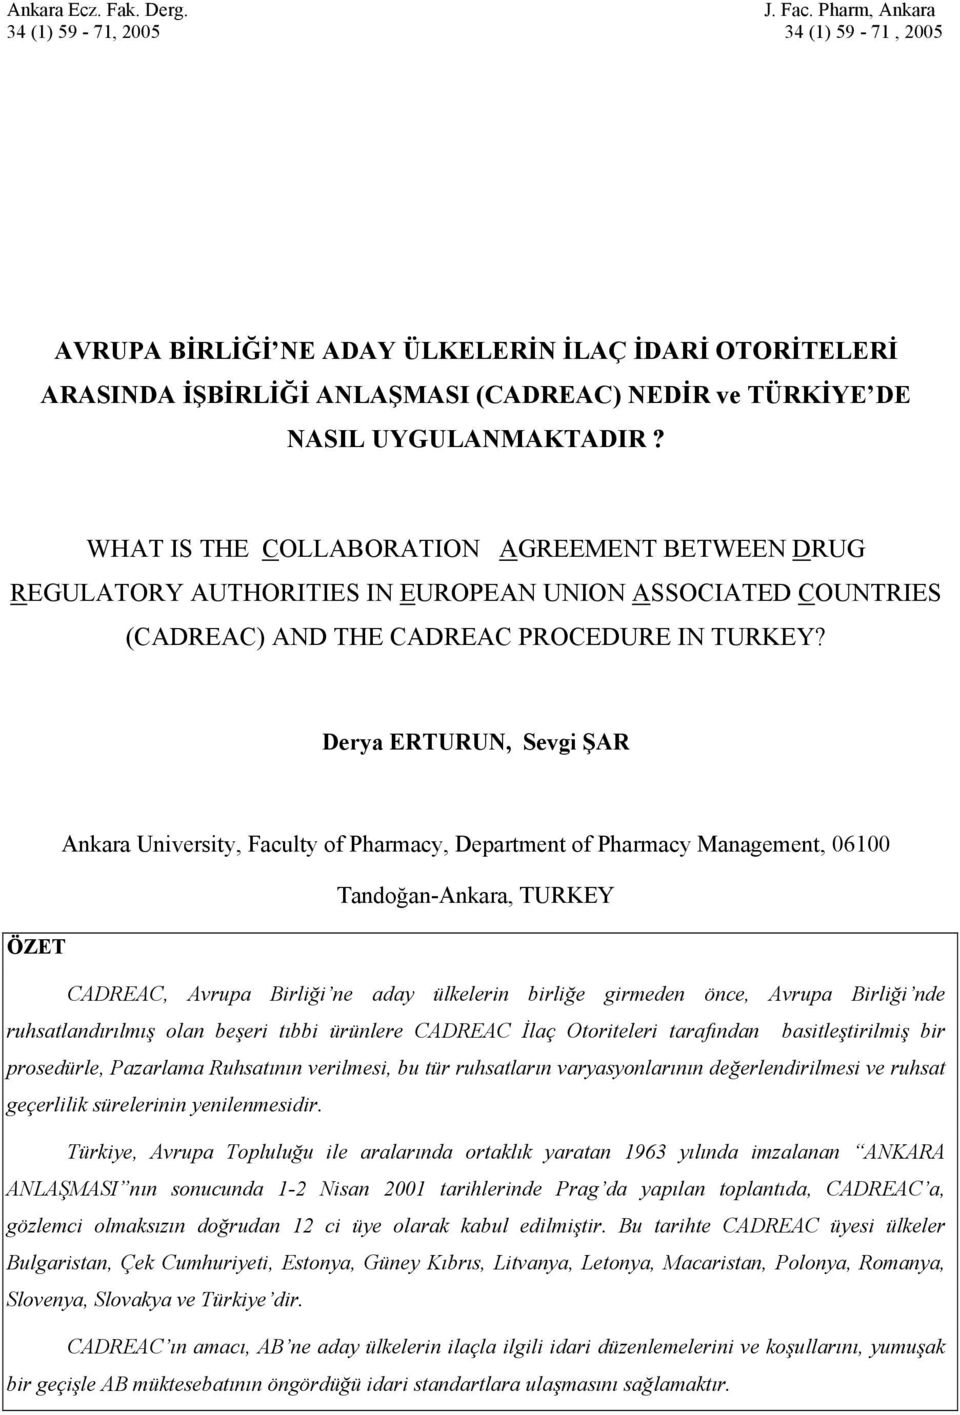 WHAT IS THE COLLABORATION AGREEMENT BETWEEN DRUG REGULATORY AUTHORITIES IN EUROPEAN UNION ASSOCIATED COUNTRIES (CADREAC) AND THE CADREAC PROCEDURE IN TURKEY?